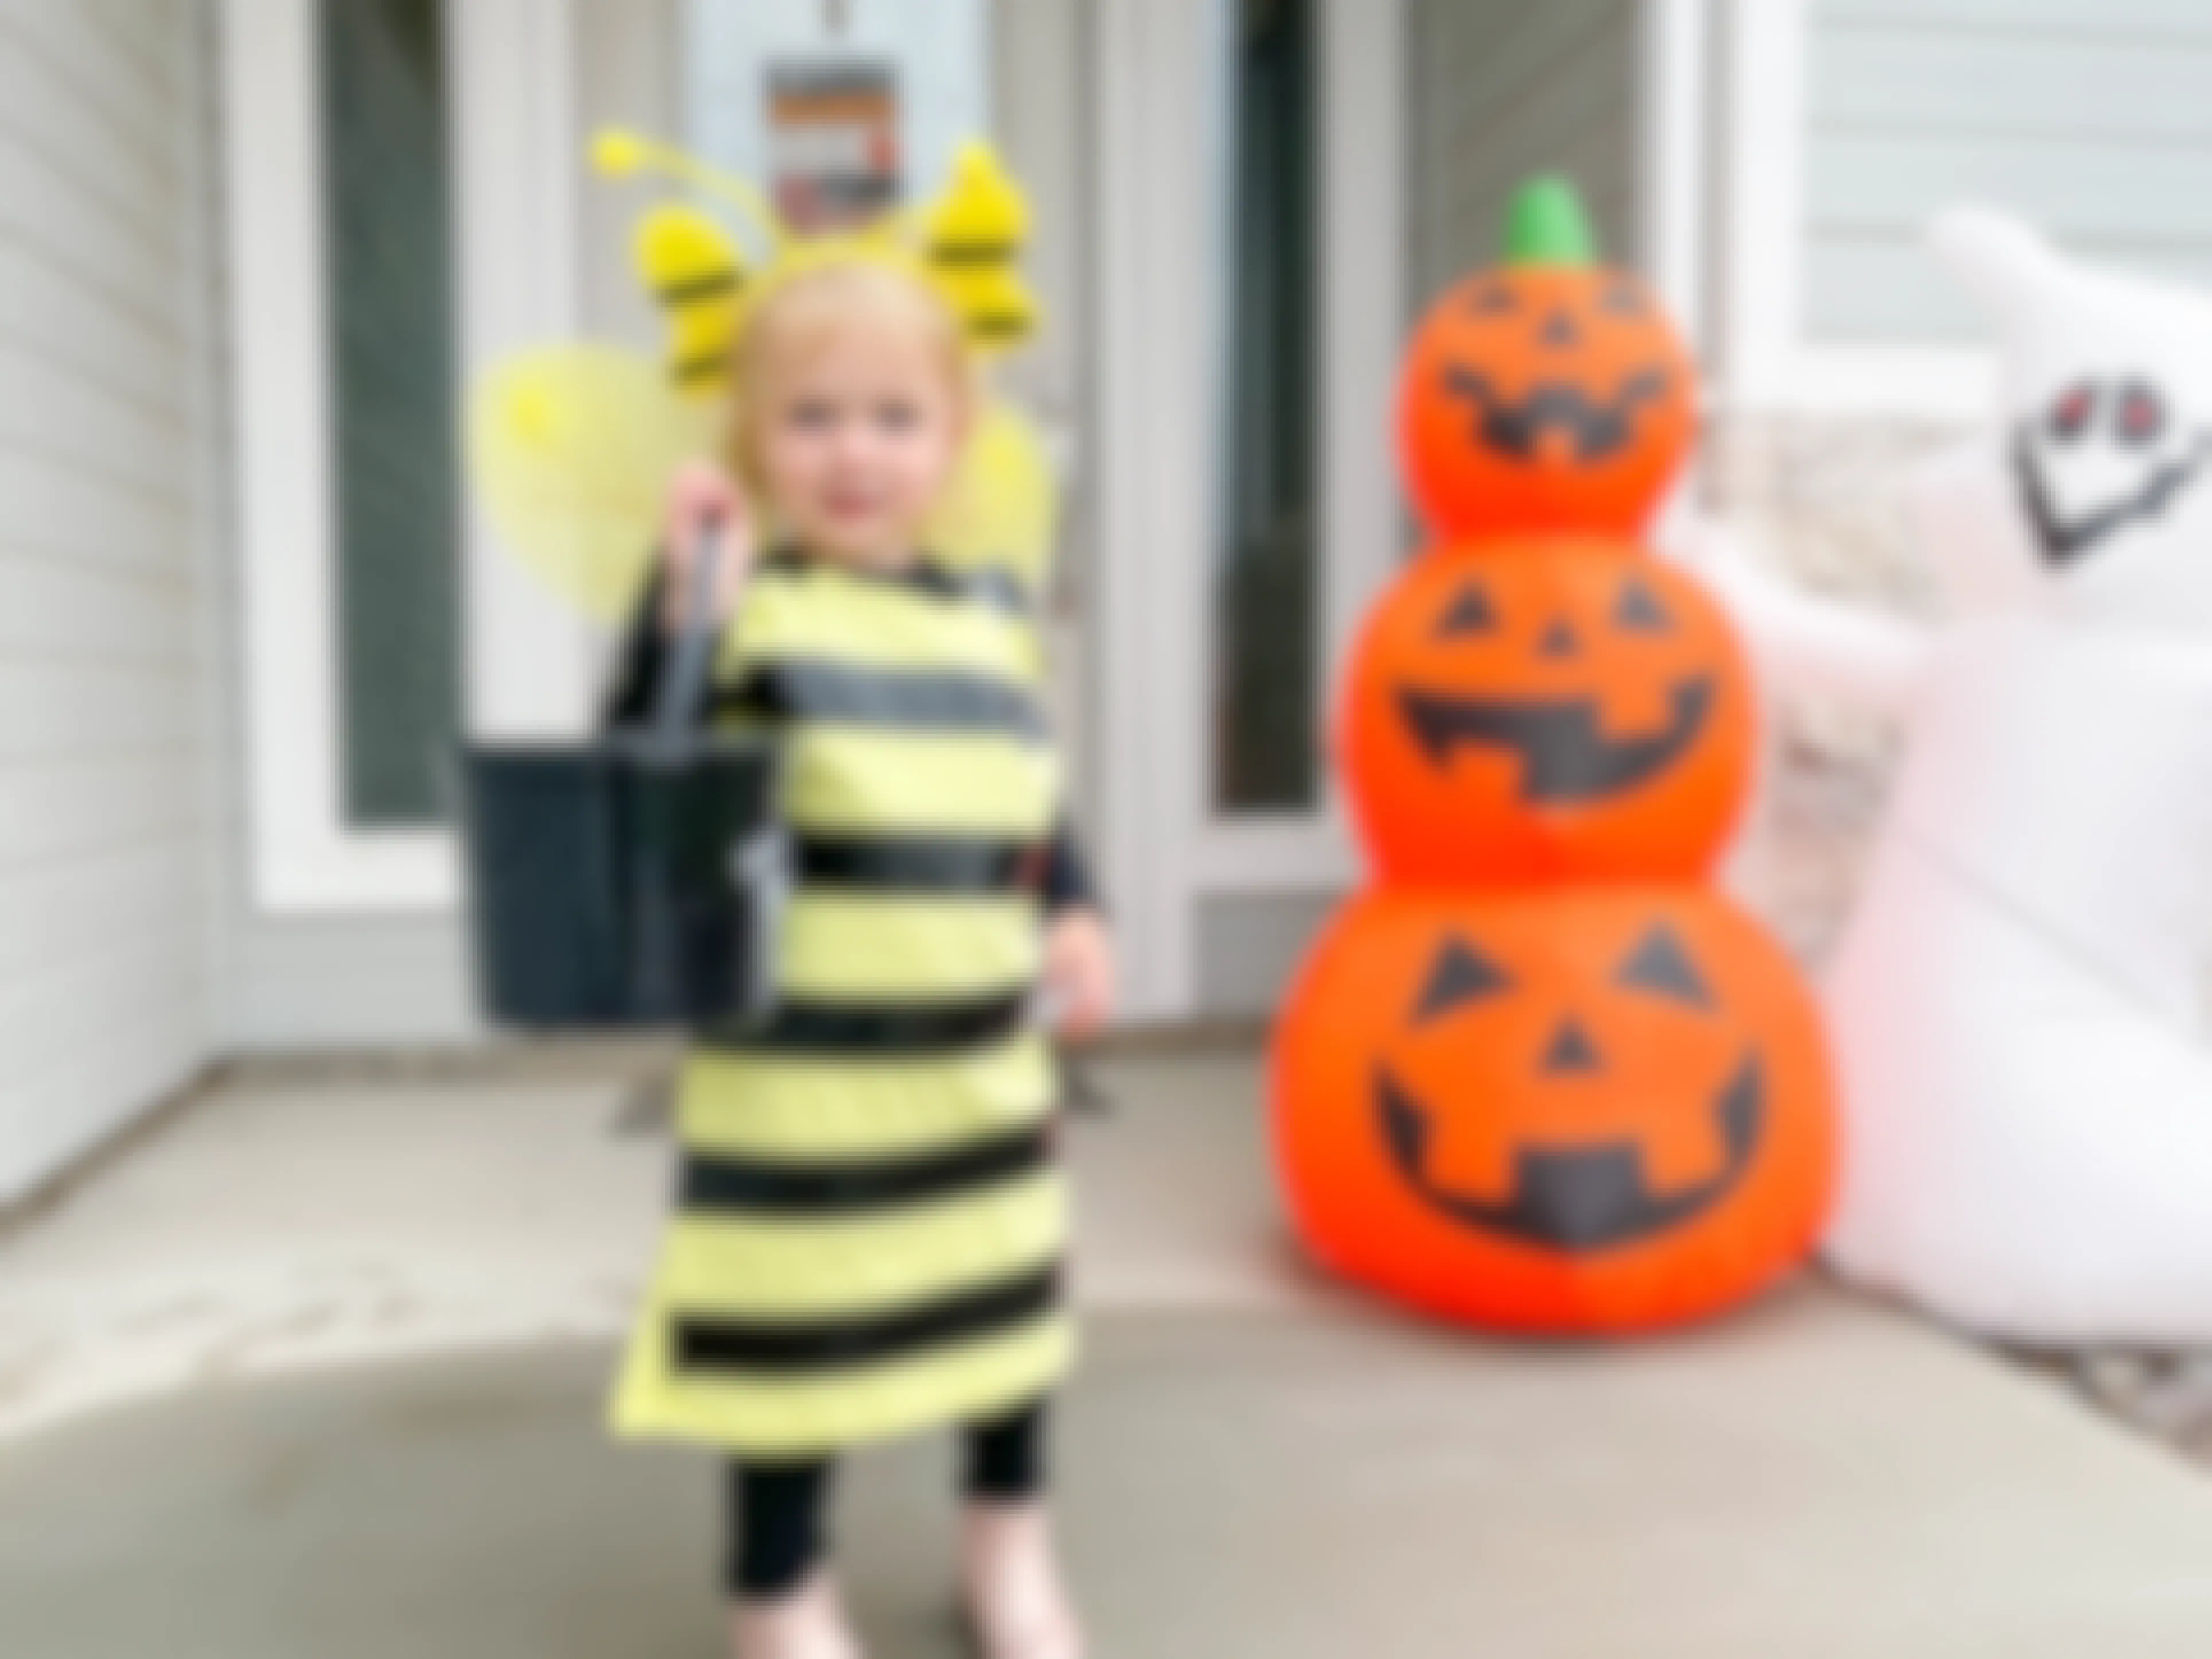 little girl dressed as a bee 